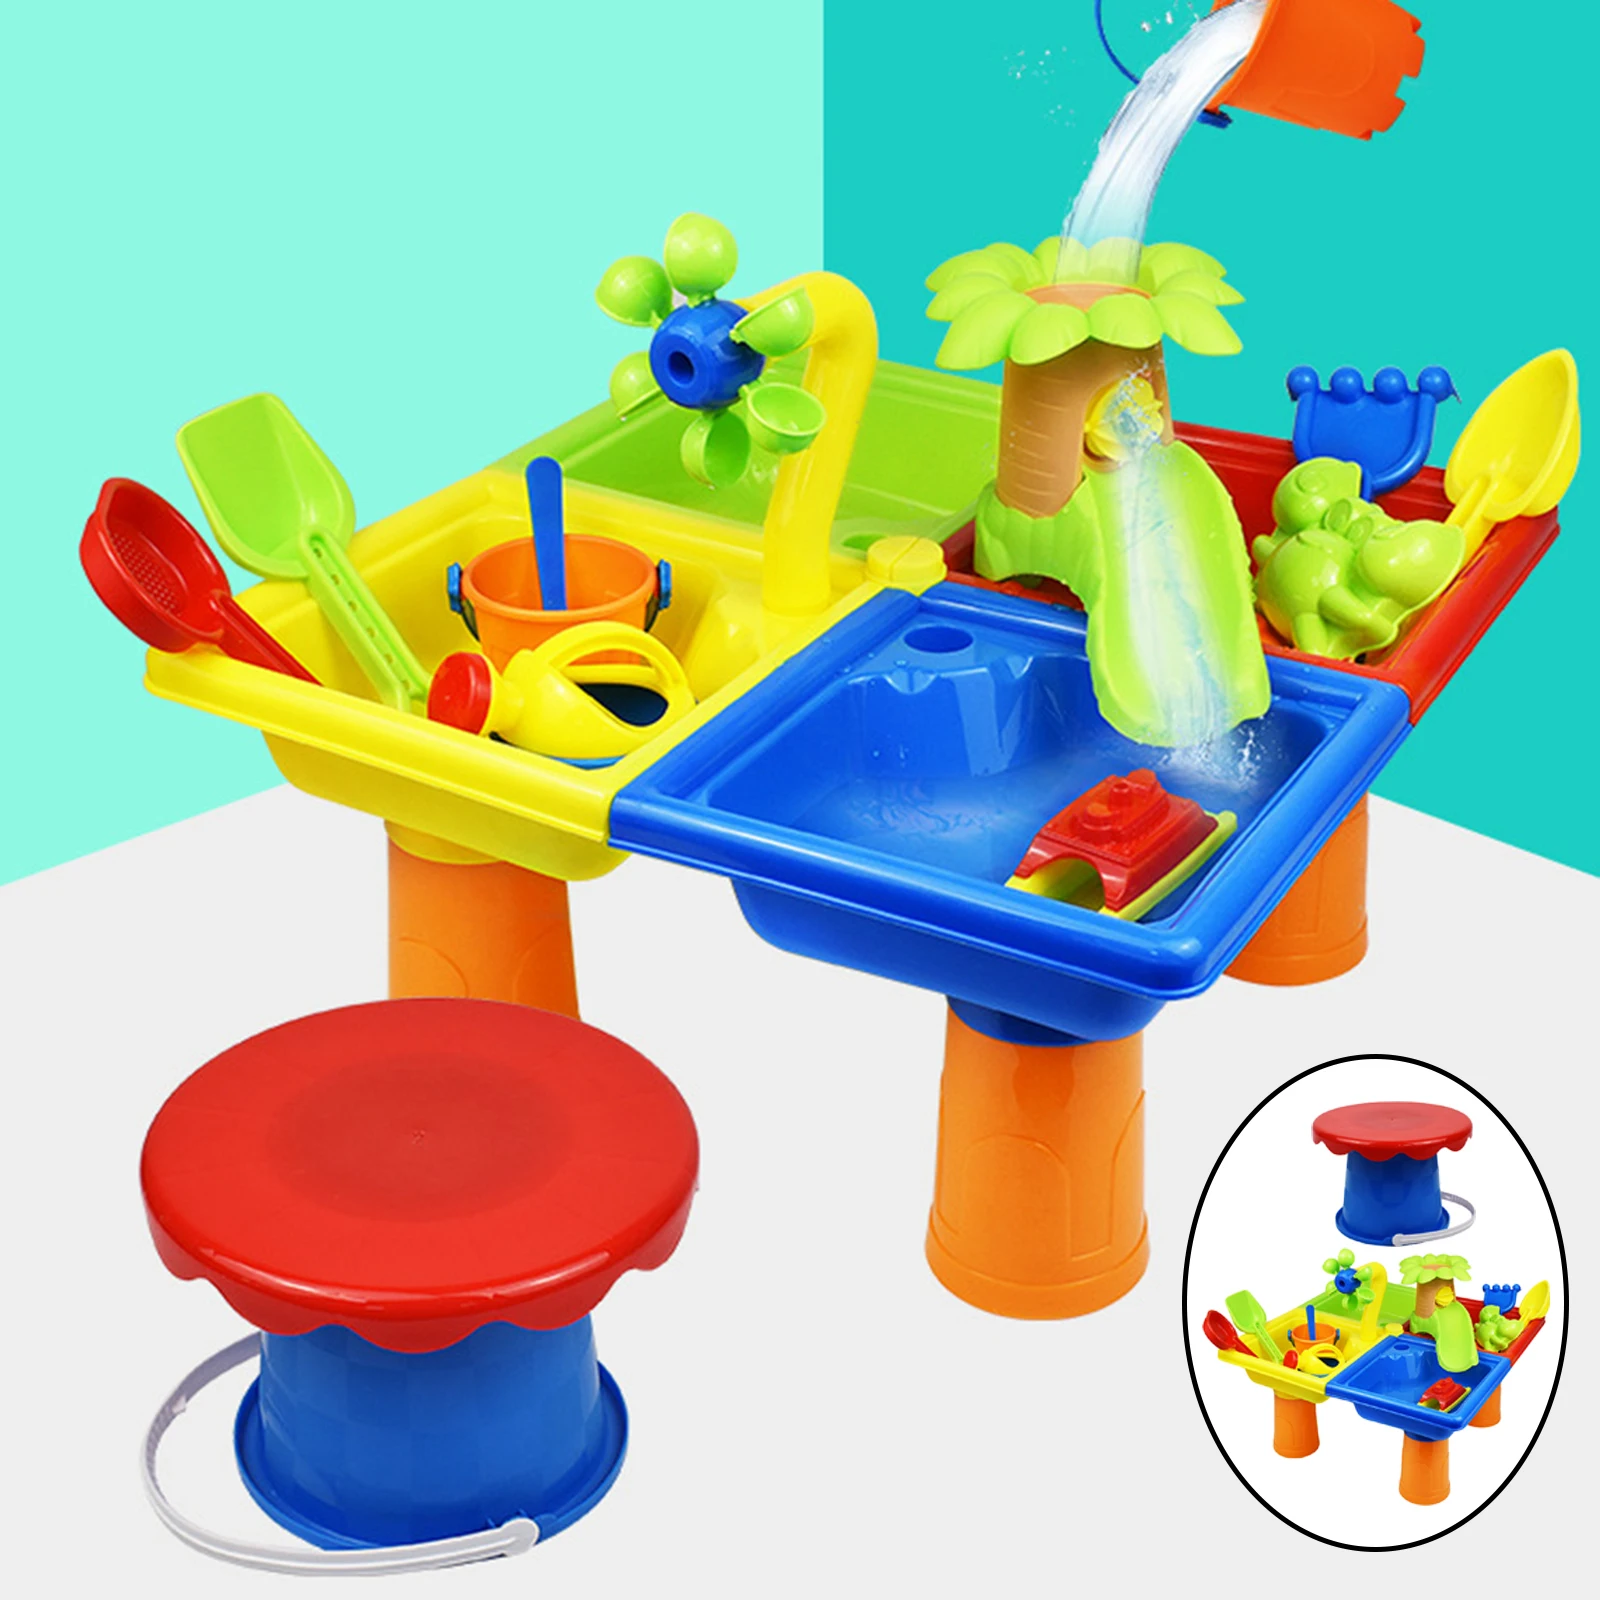 2 in 1 Kids Sand Water Table with Tools Toddlers Indoor Outdoor Sandbox Sand Table Sensory Table Beach Toy Birthday Gifts